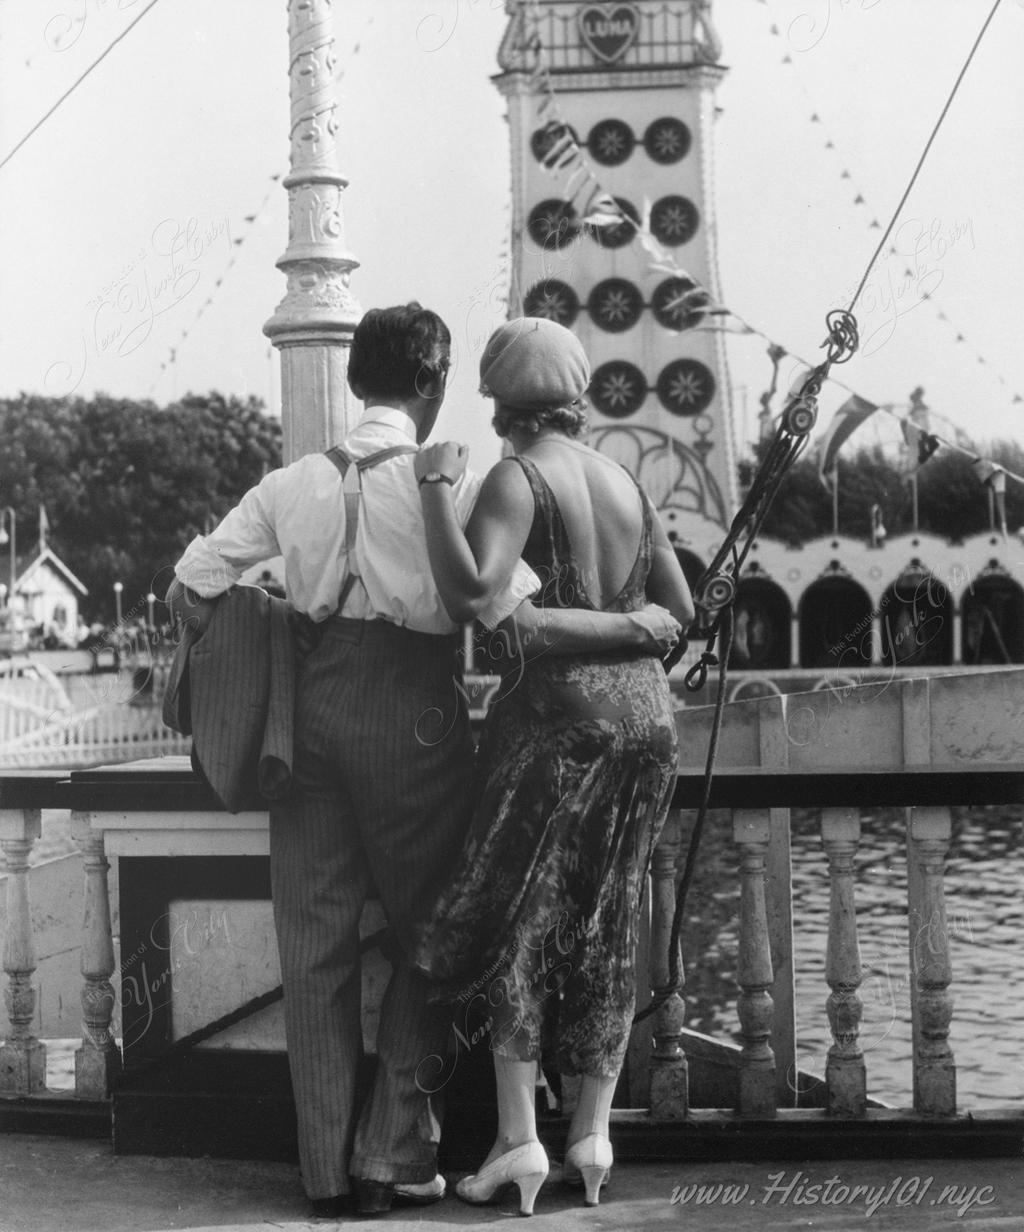 Photograph of a young couple holding each other at Coney Island's Luna Park.